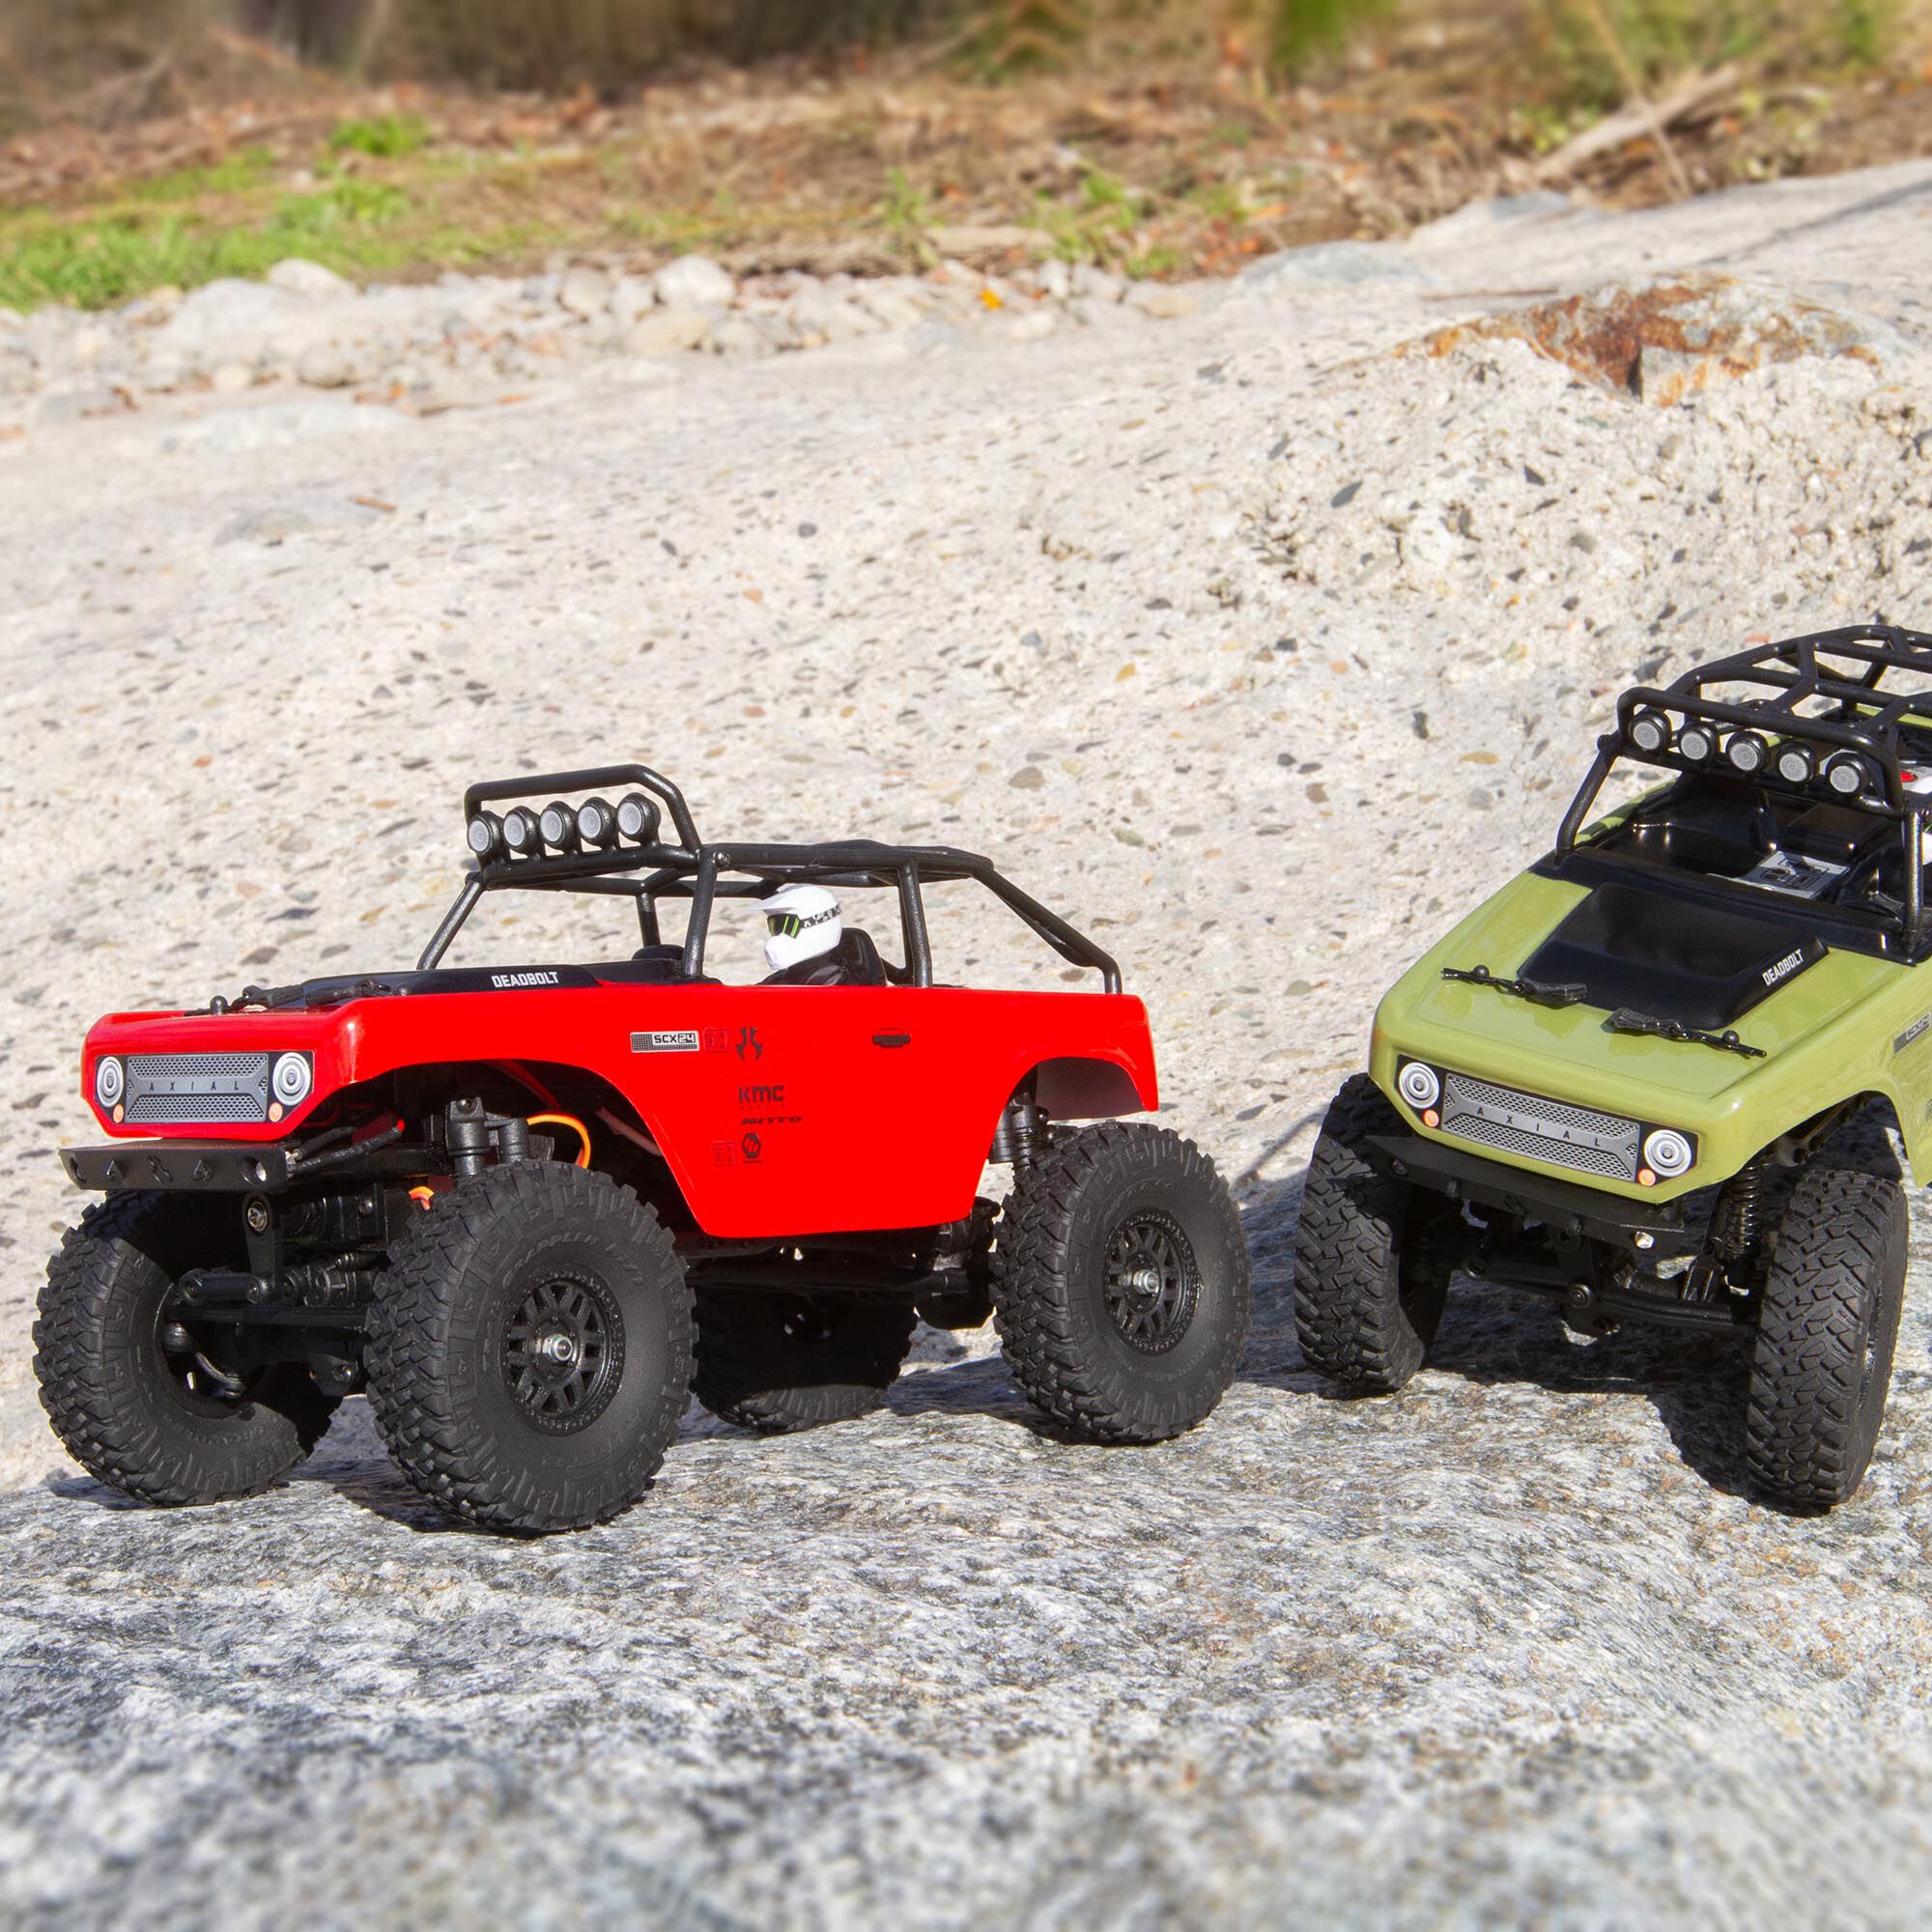 RTR Axial SCX24 Deadbolt 1/24th Scale Elec 4WD Red for sale online 